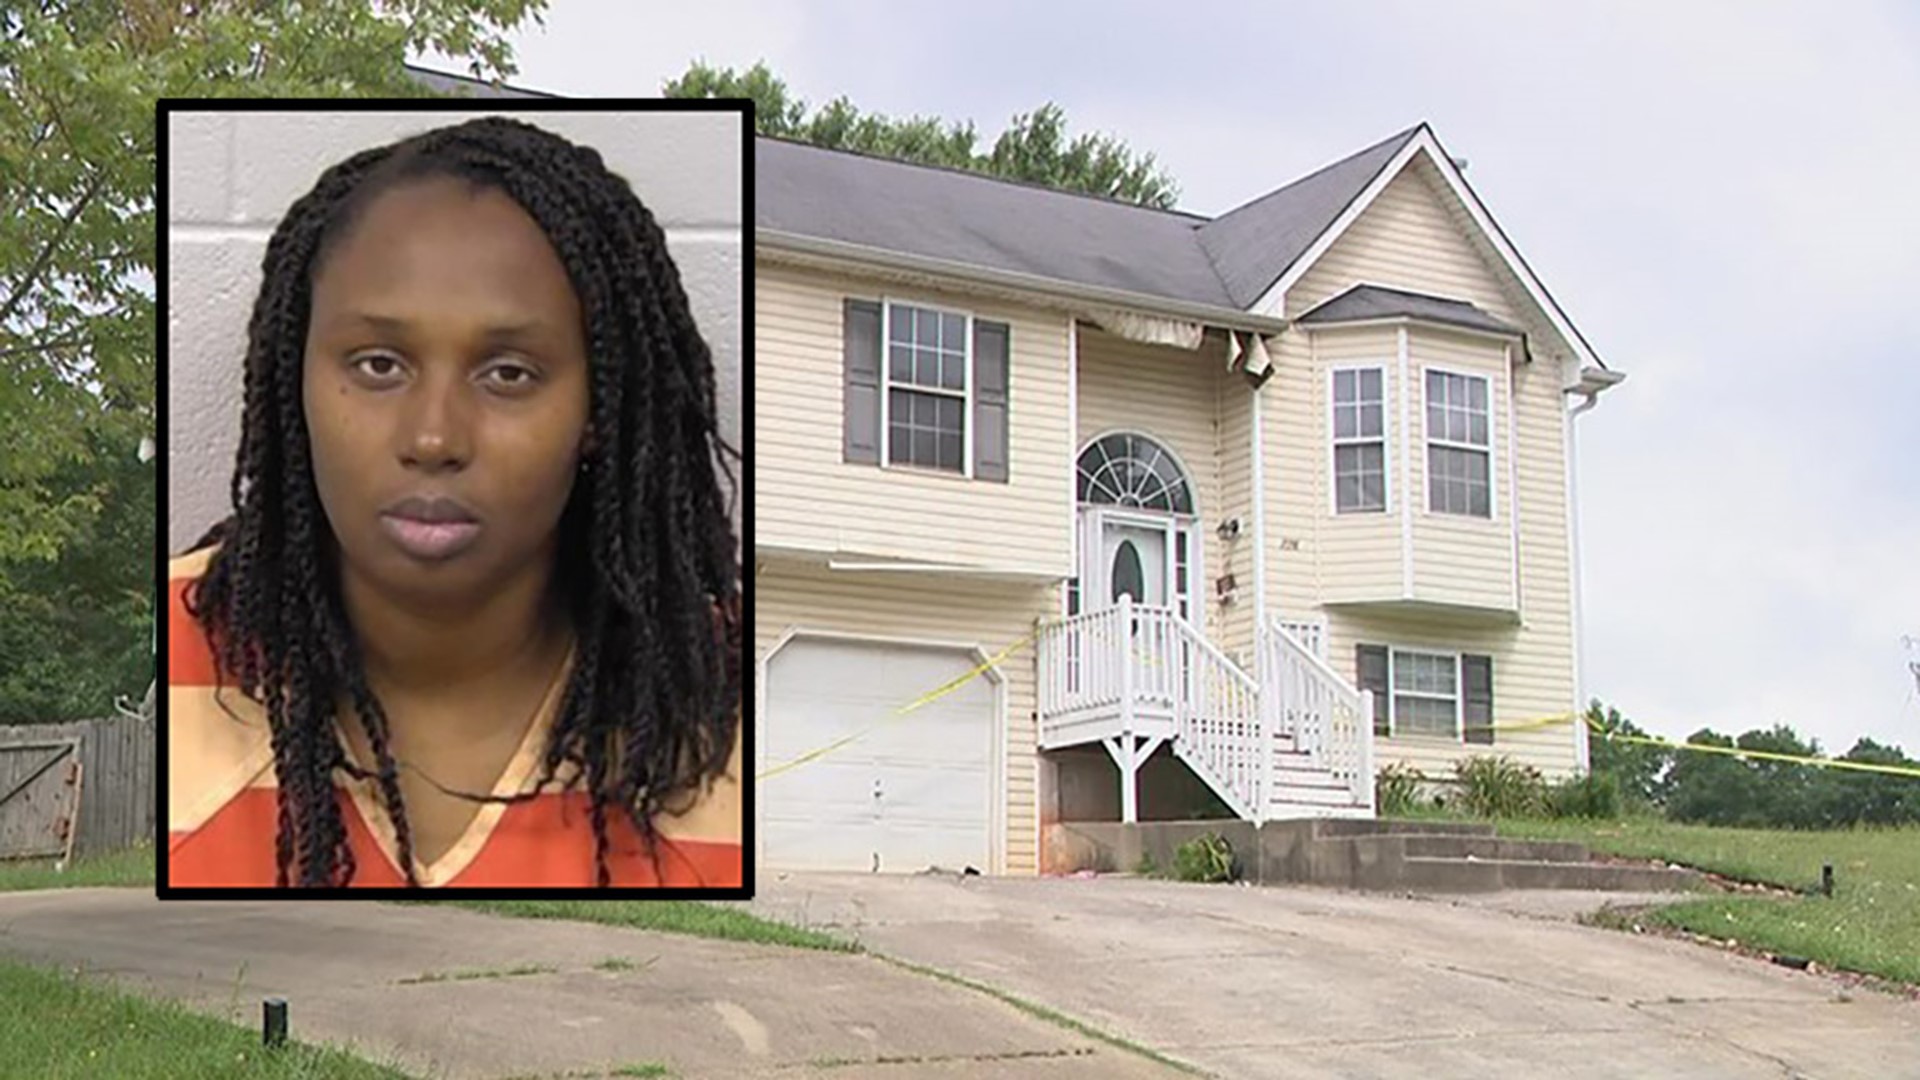 The sheriff's office said seven children were inside the house on Woodwind Drive when Darlene Brister began attacking the children.